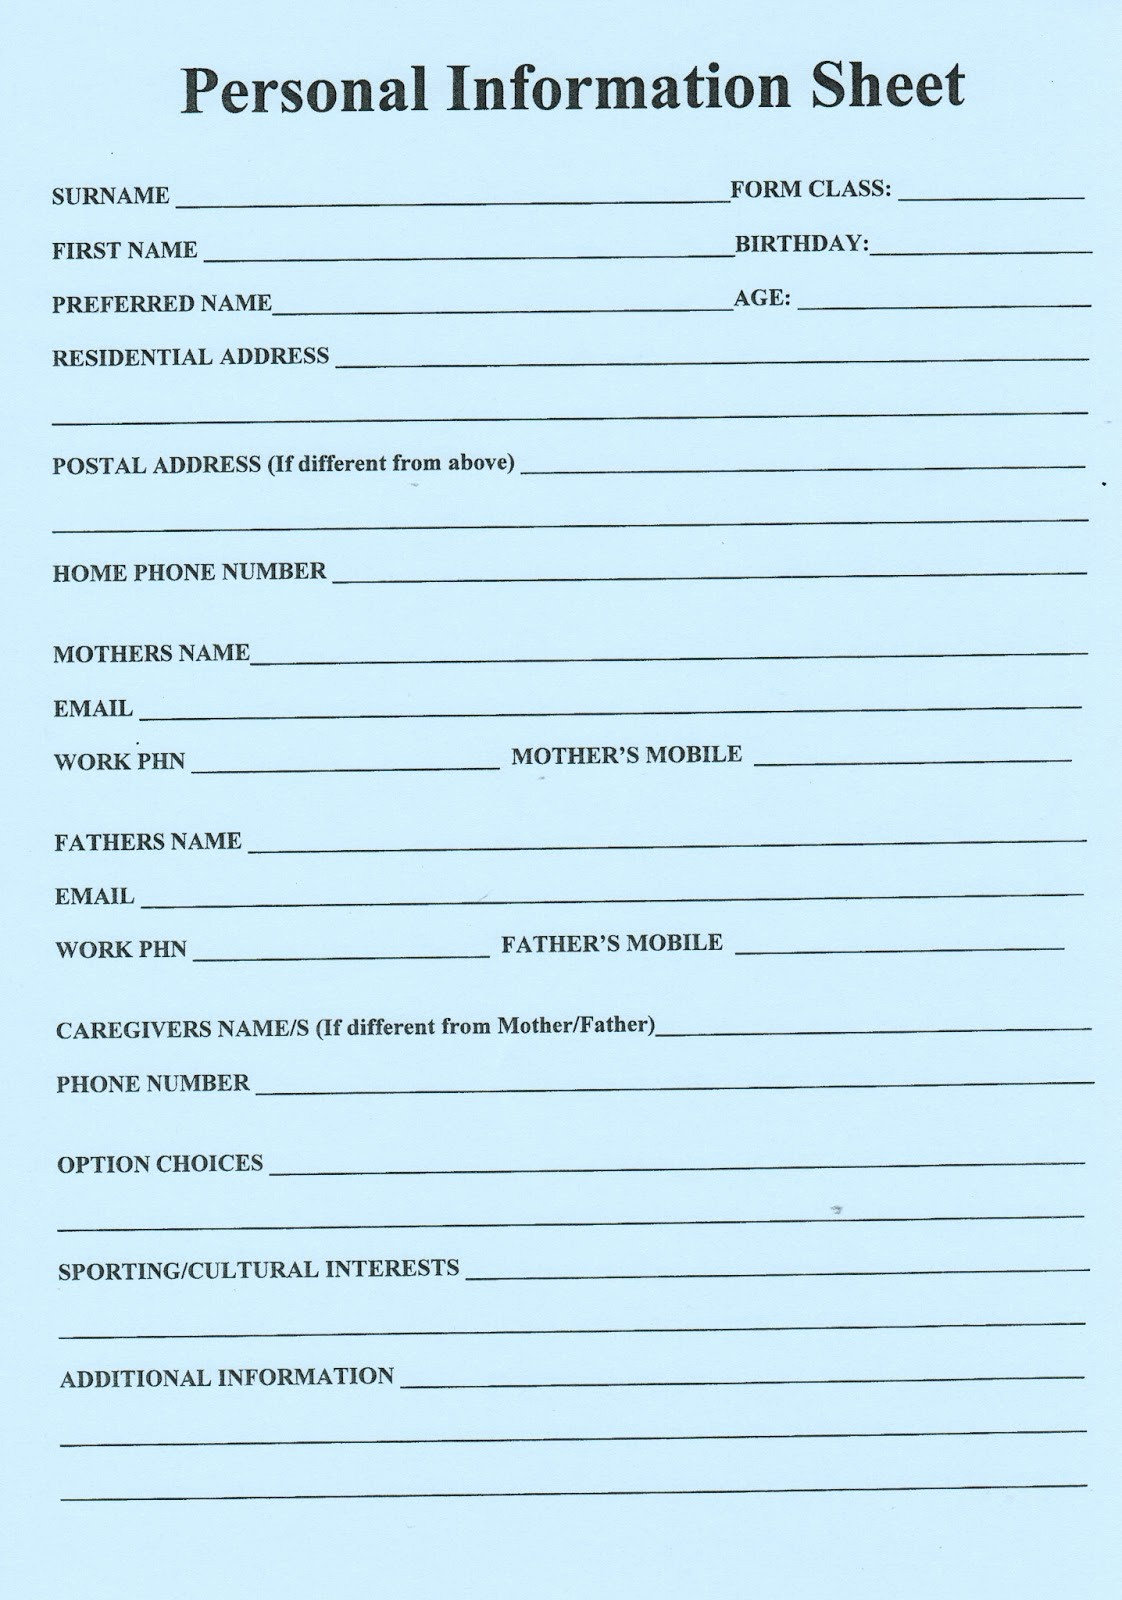 Personal Information form for Students Best Of 12pywghs2013 January 2013